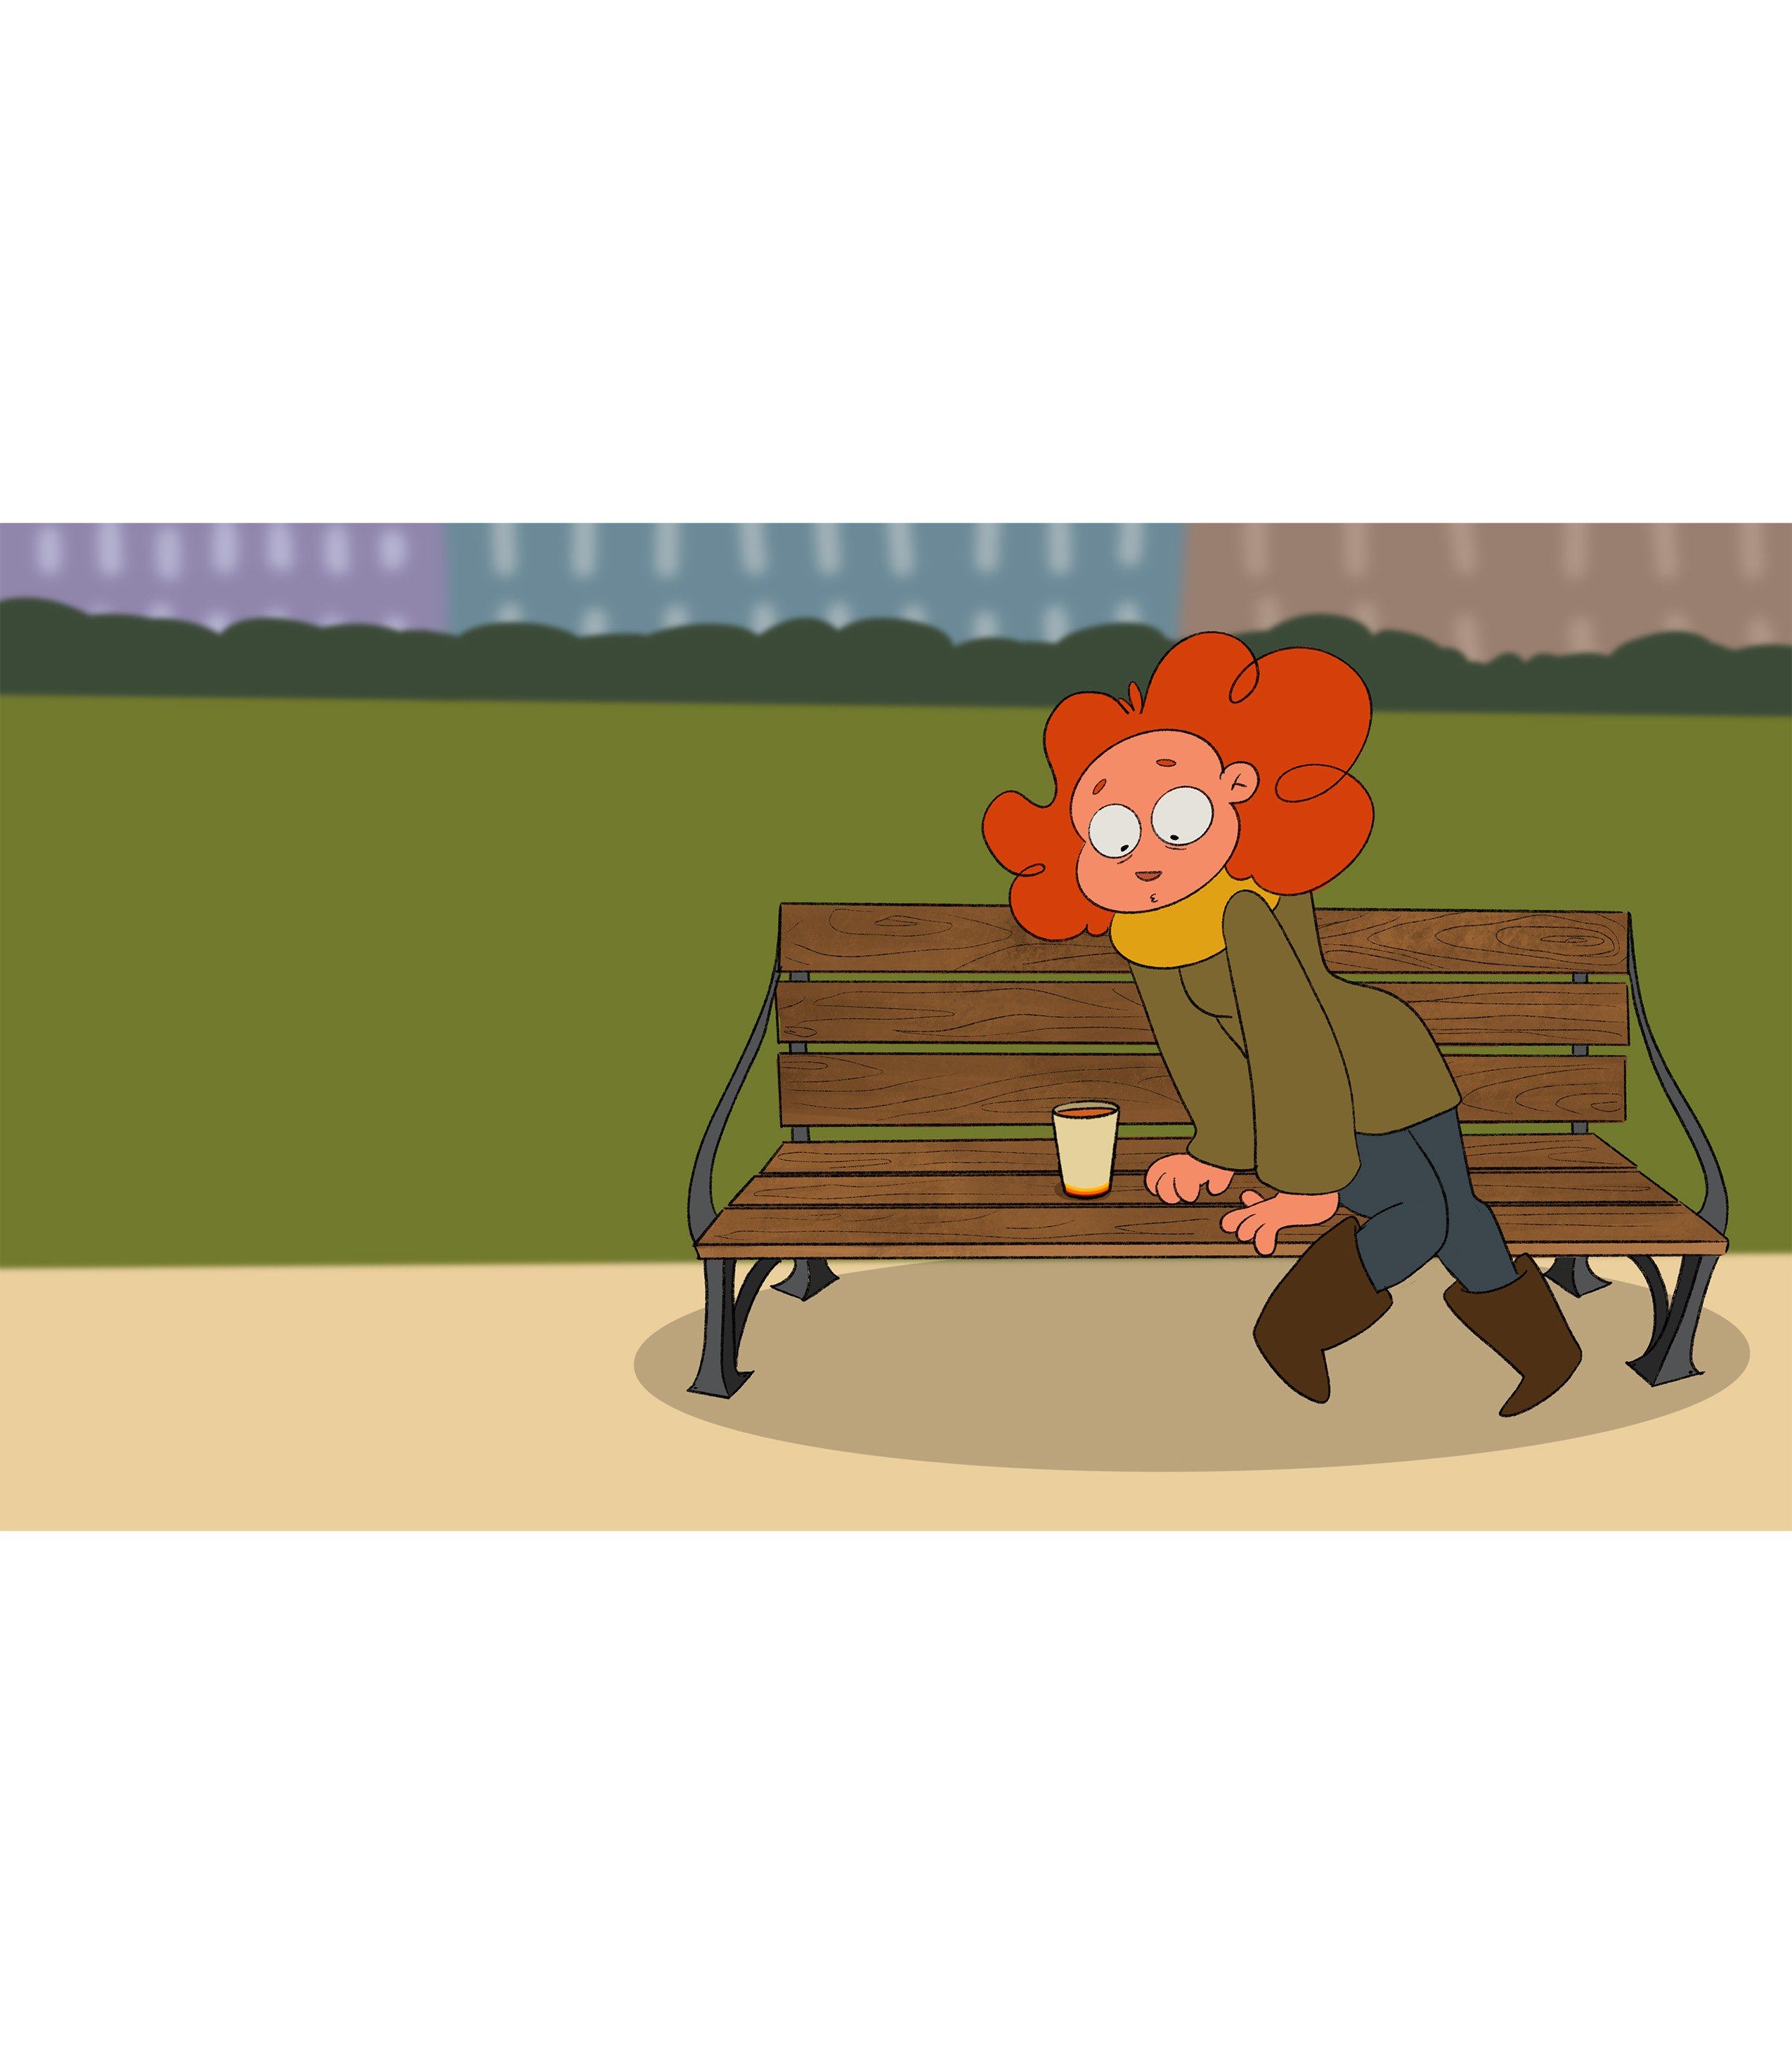  / Still of character Poppy from "Poppy & Pidge," an animated short created using Procreate, ToonBoom, and AfterEffects.